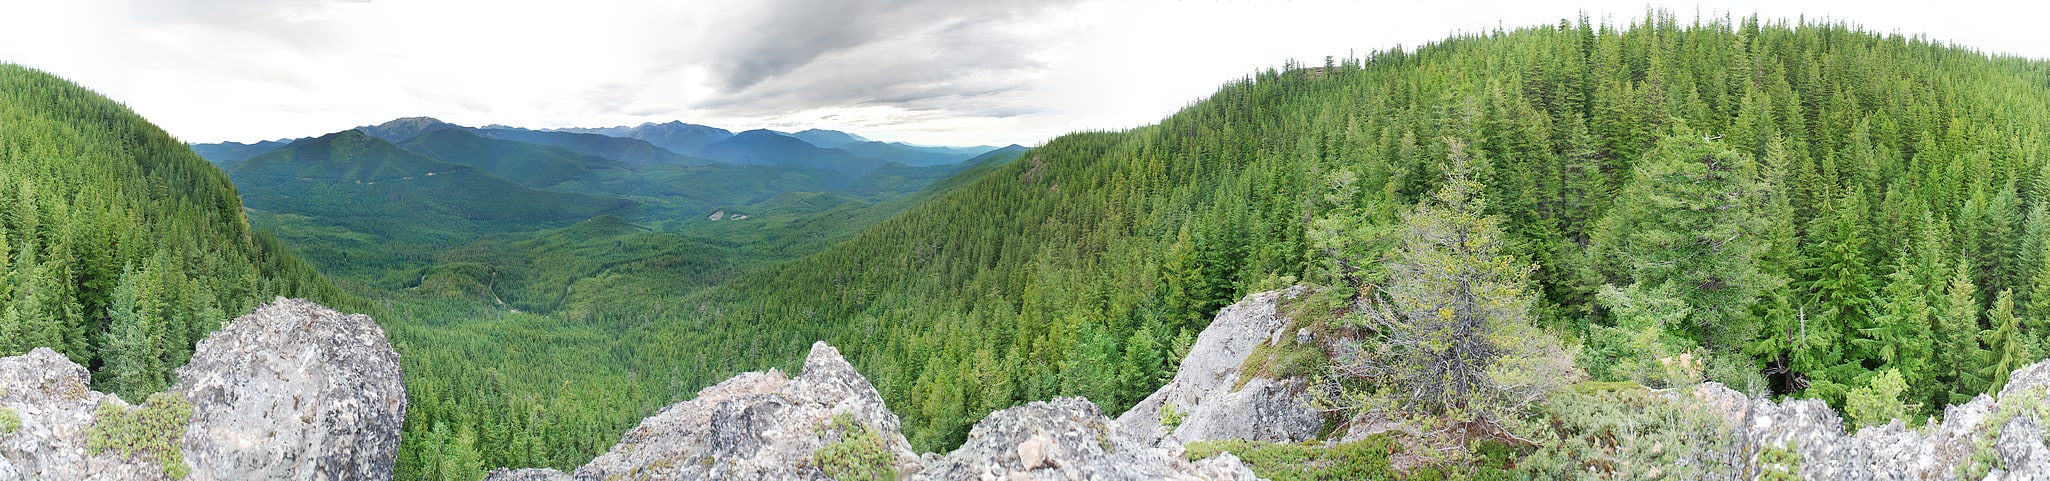 Olympic National Forest, United States